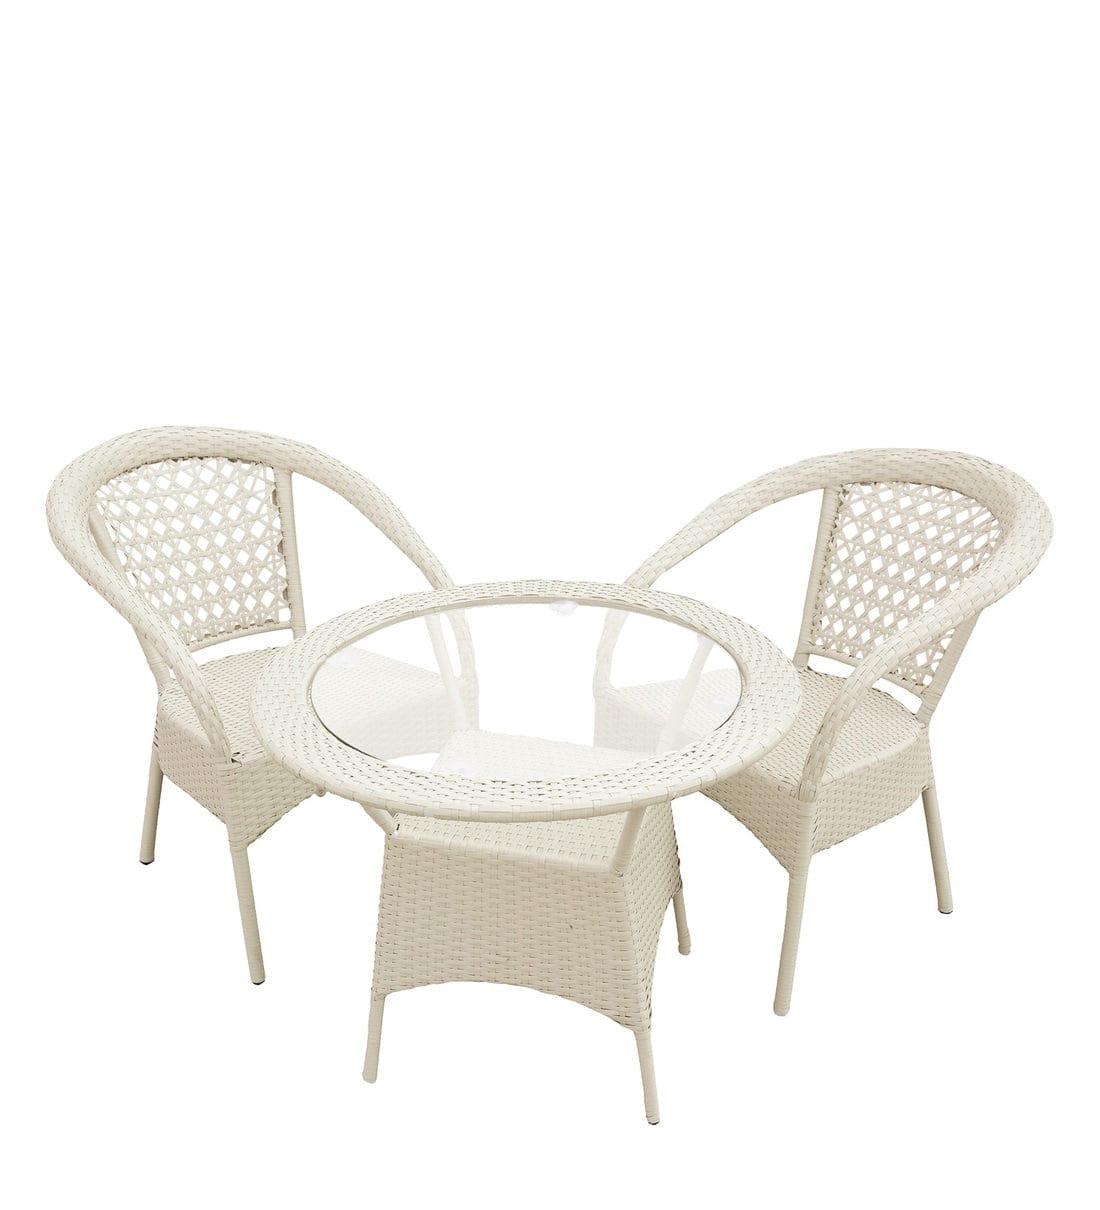 Dreamline Outdoor Furniture Garden Patio Seating Set Chairs And Table Set (White)